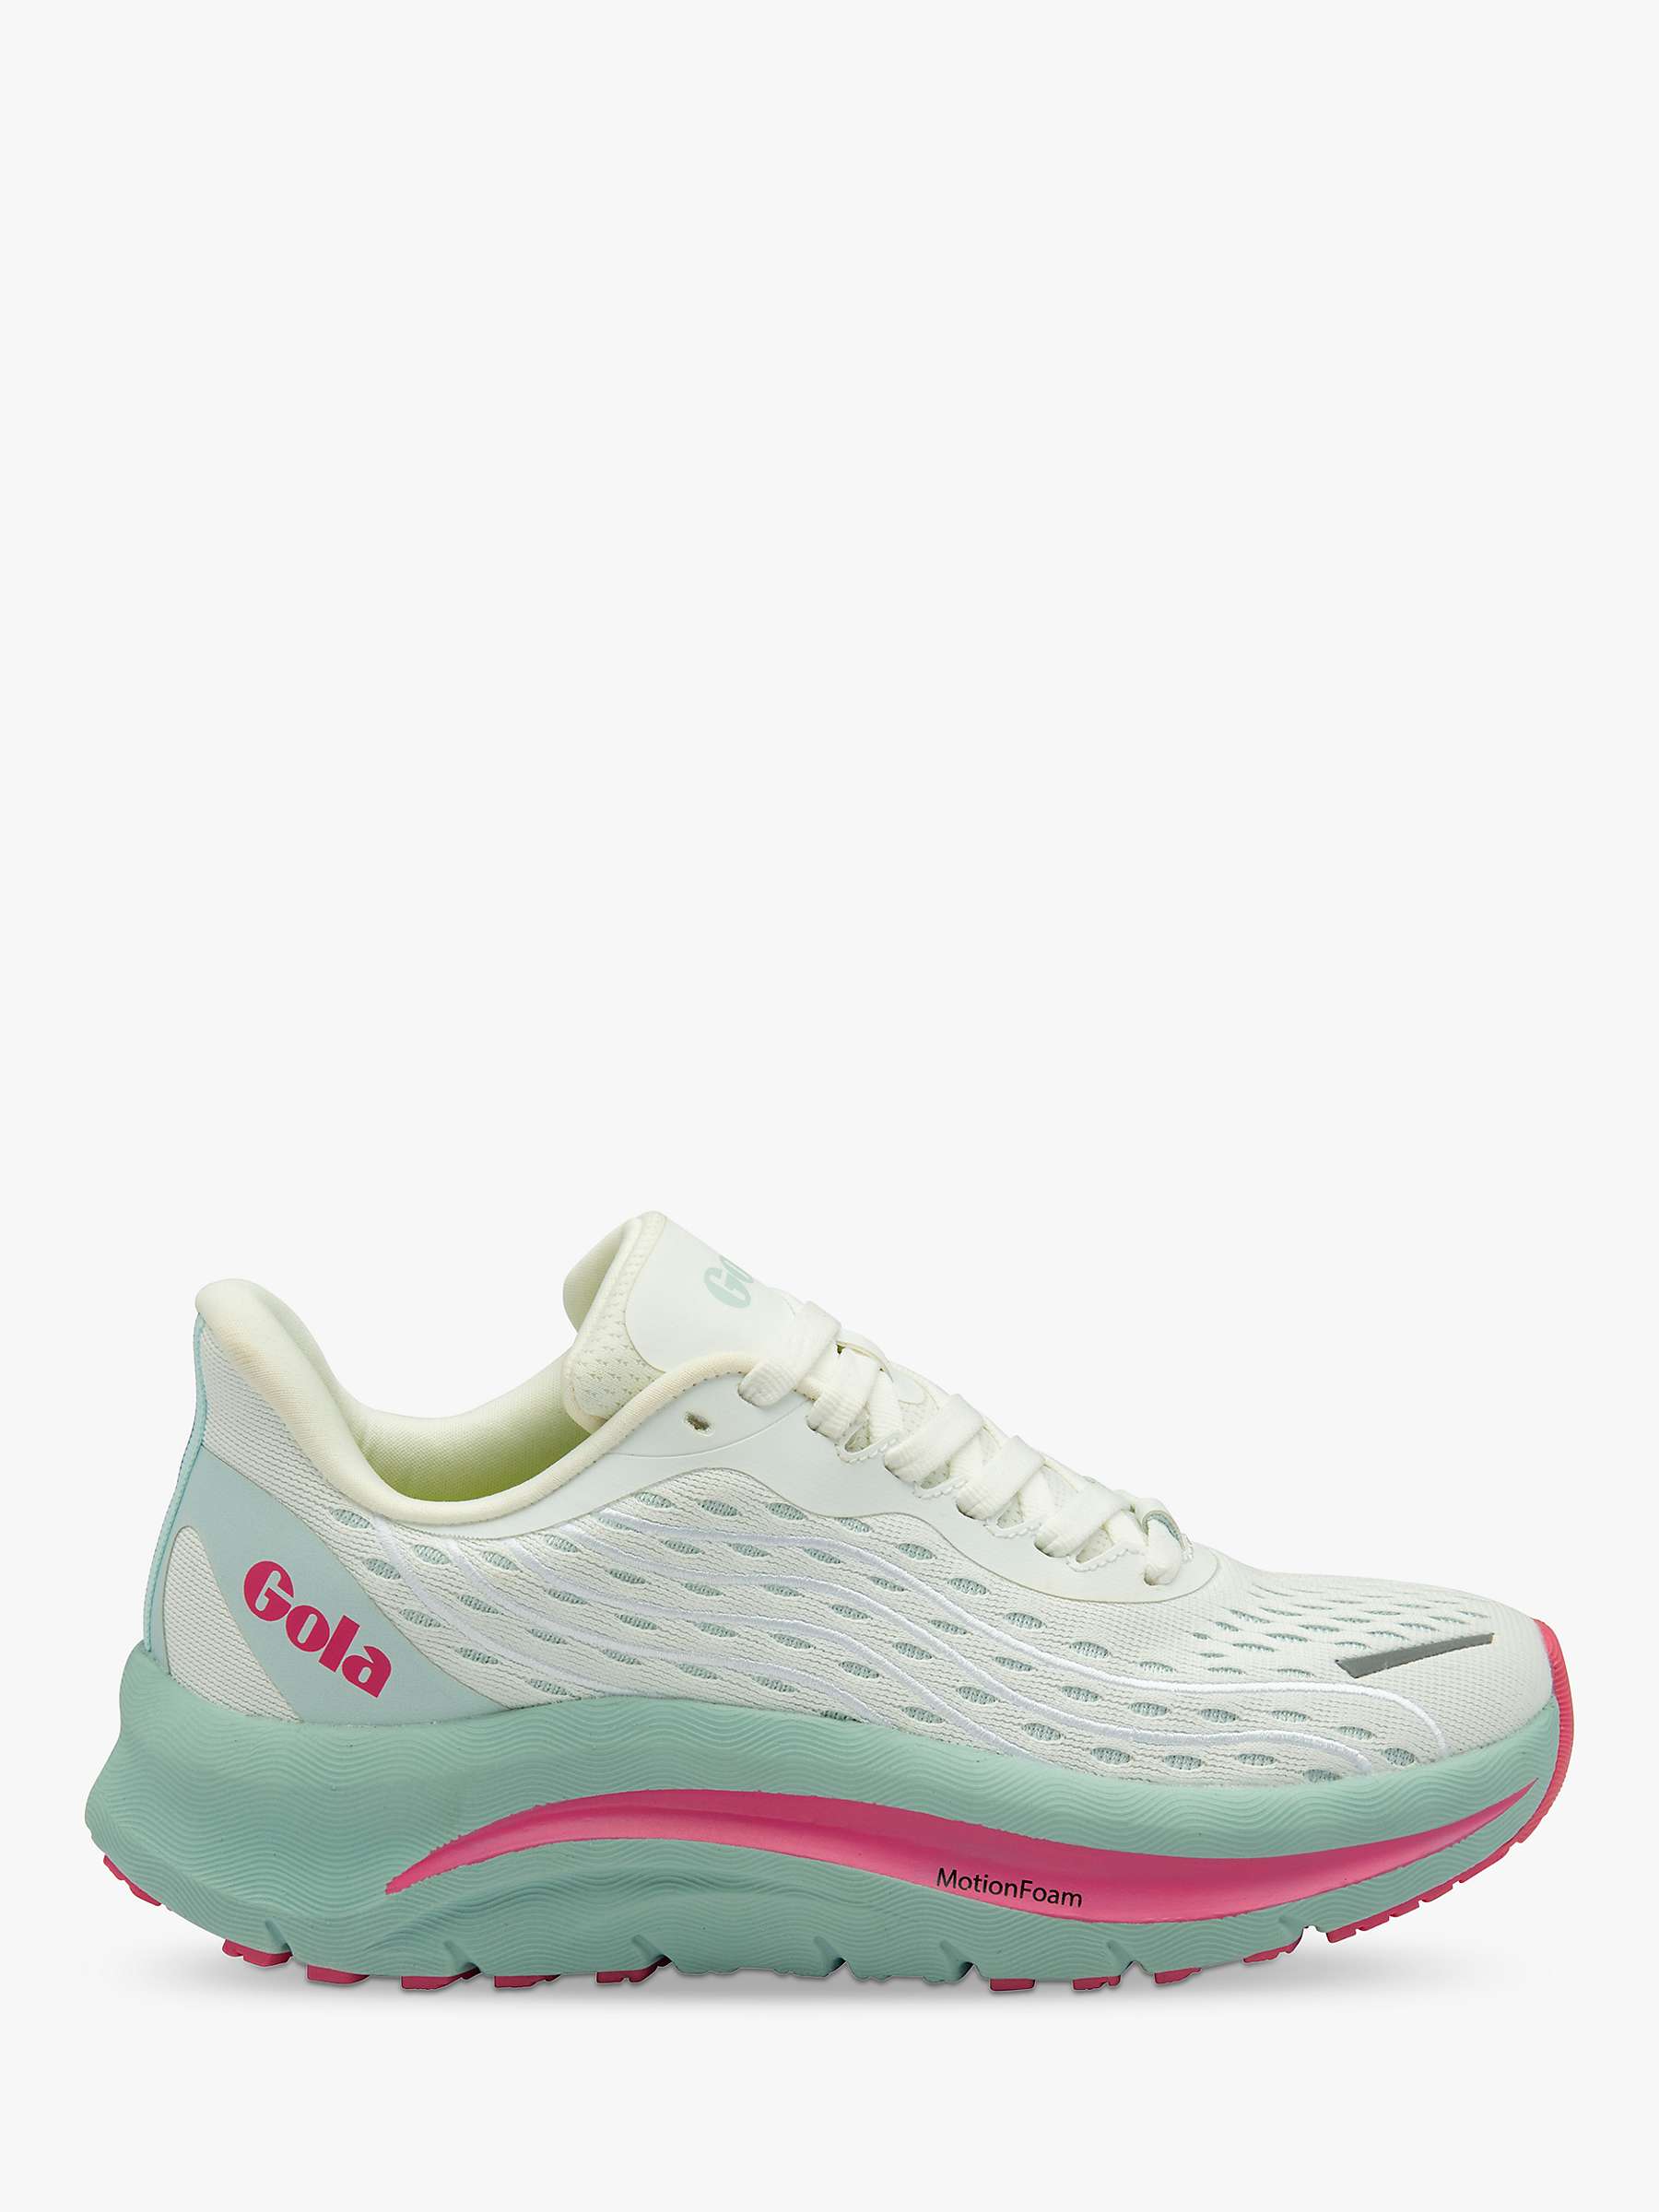 Buy Gola Performance Alzir Speed Running Trainers Online at johnlewis.com